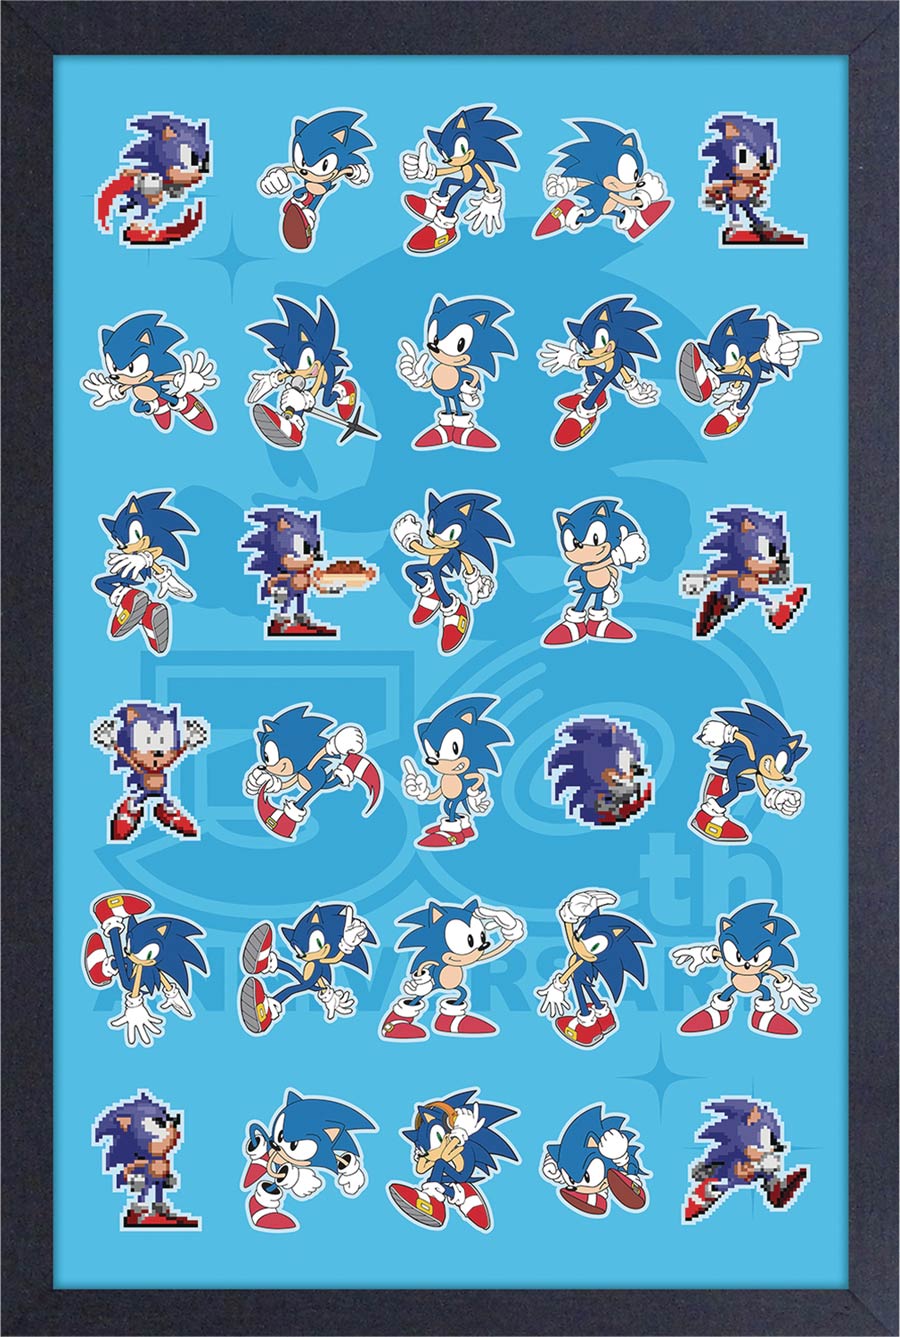 Sonic The Hedgehog 30th Anniversary 11x17 Framed Print - Sonic Through The Years